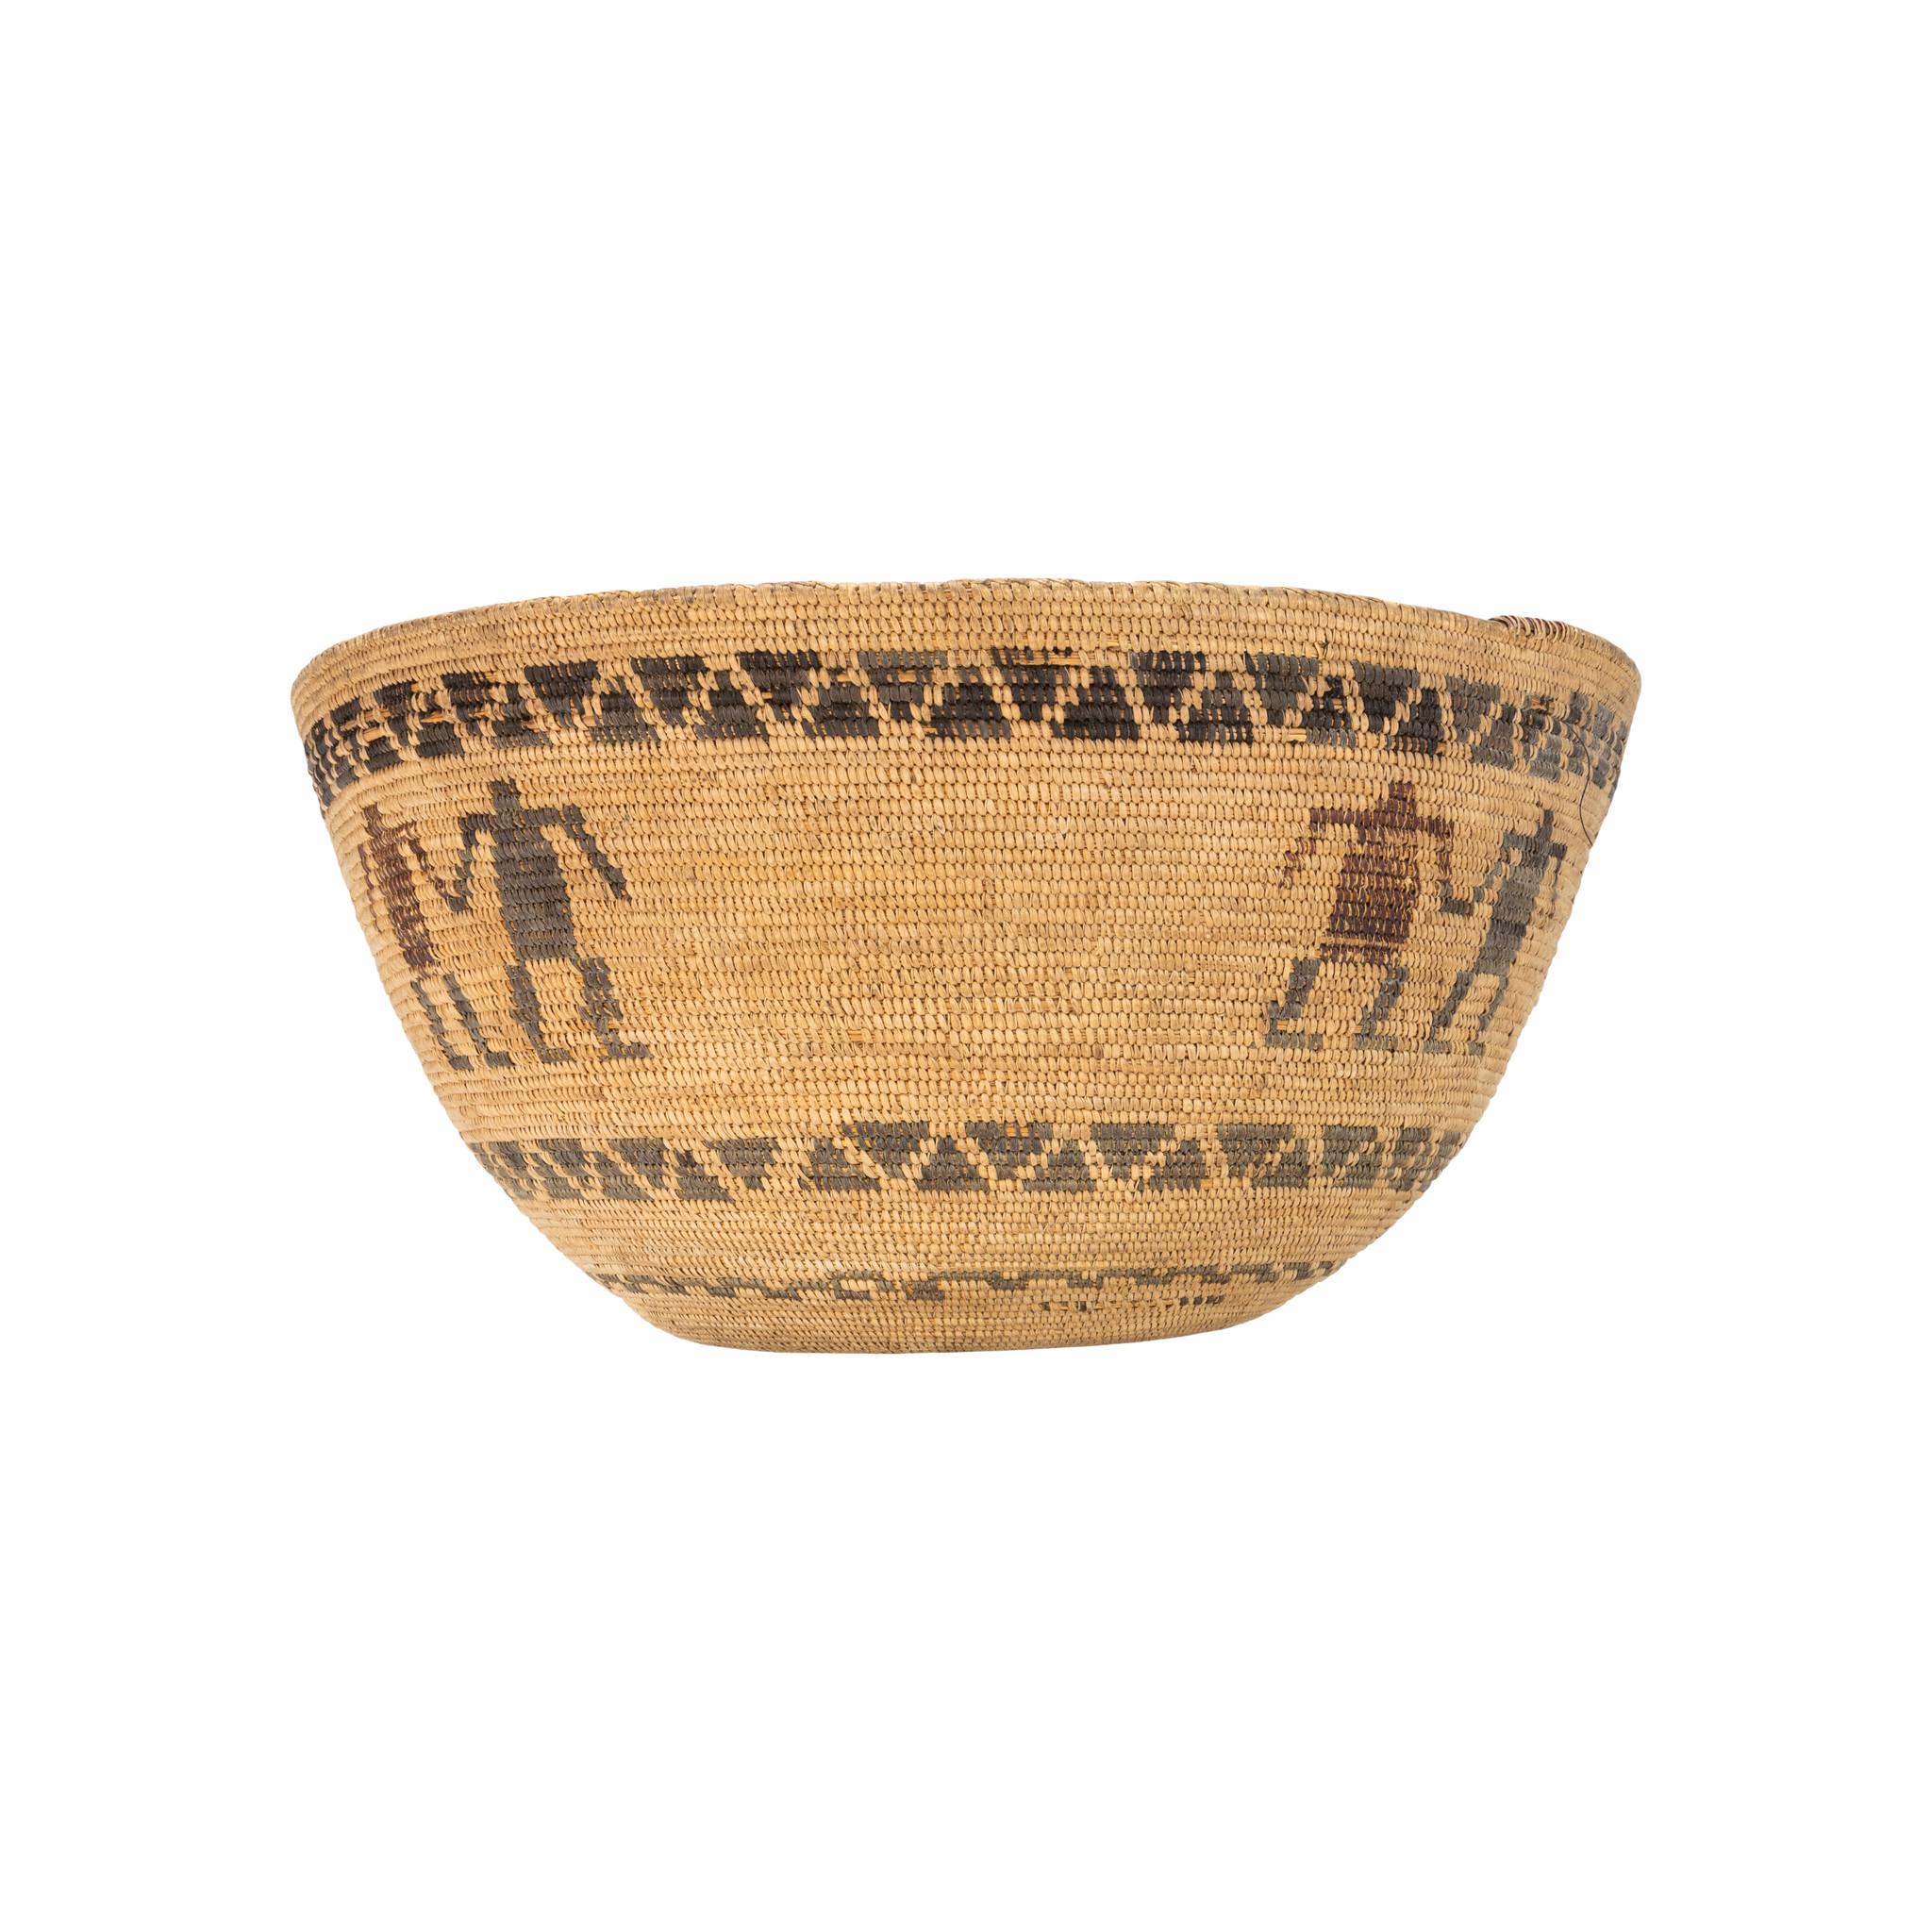 Yokut figurative basket, very fine and tight with much Native use.

Period: 19th century

Origin: Yokut

Size: 15 1/2